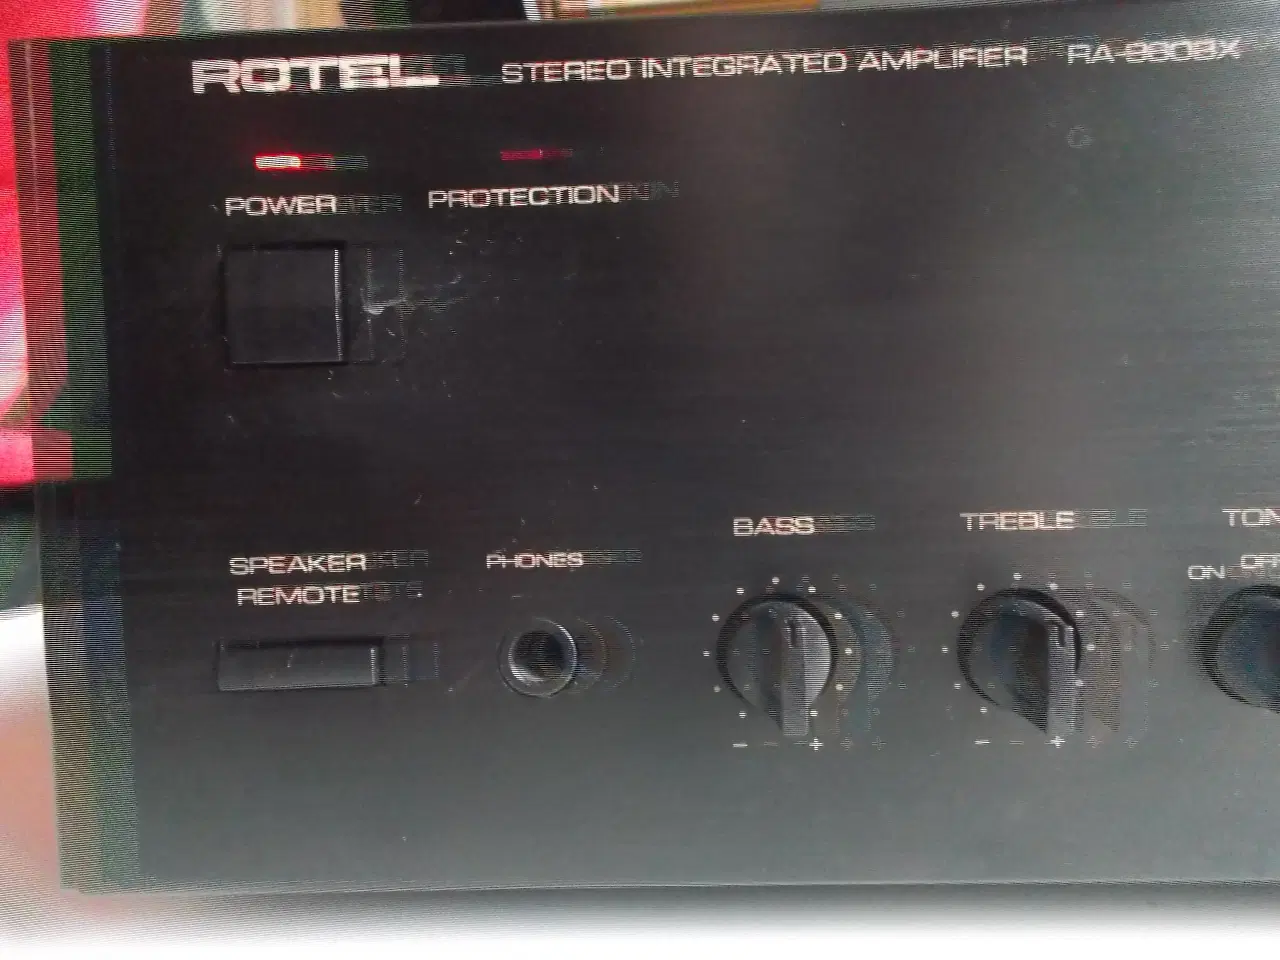 Billede 4 - Rotel RA-980BX integrated stereo amplifier